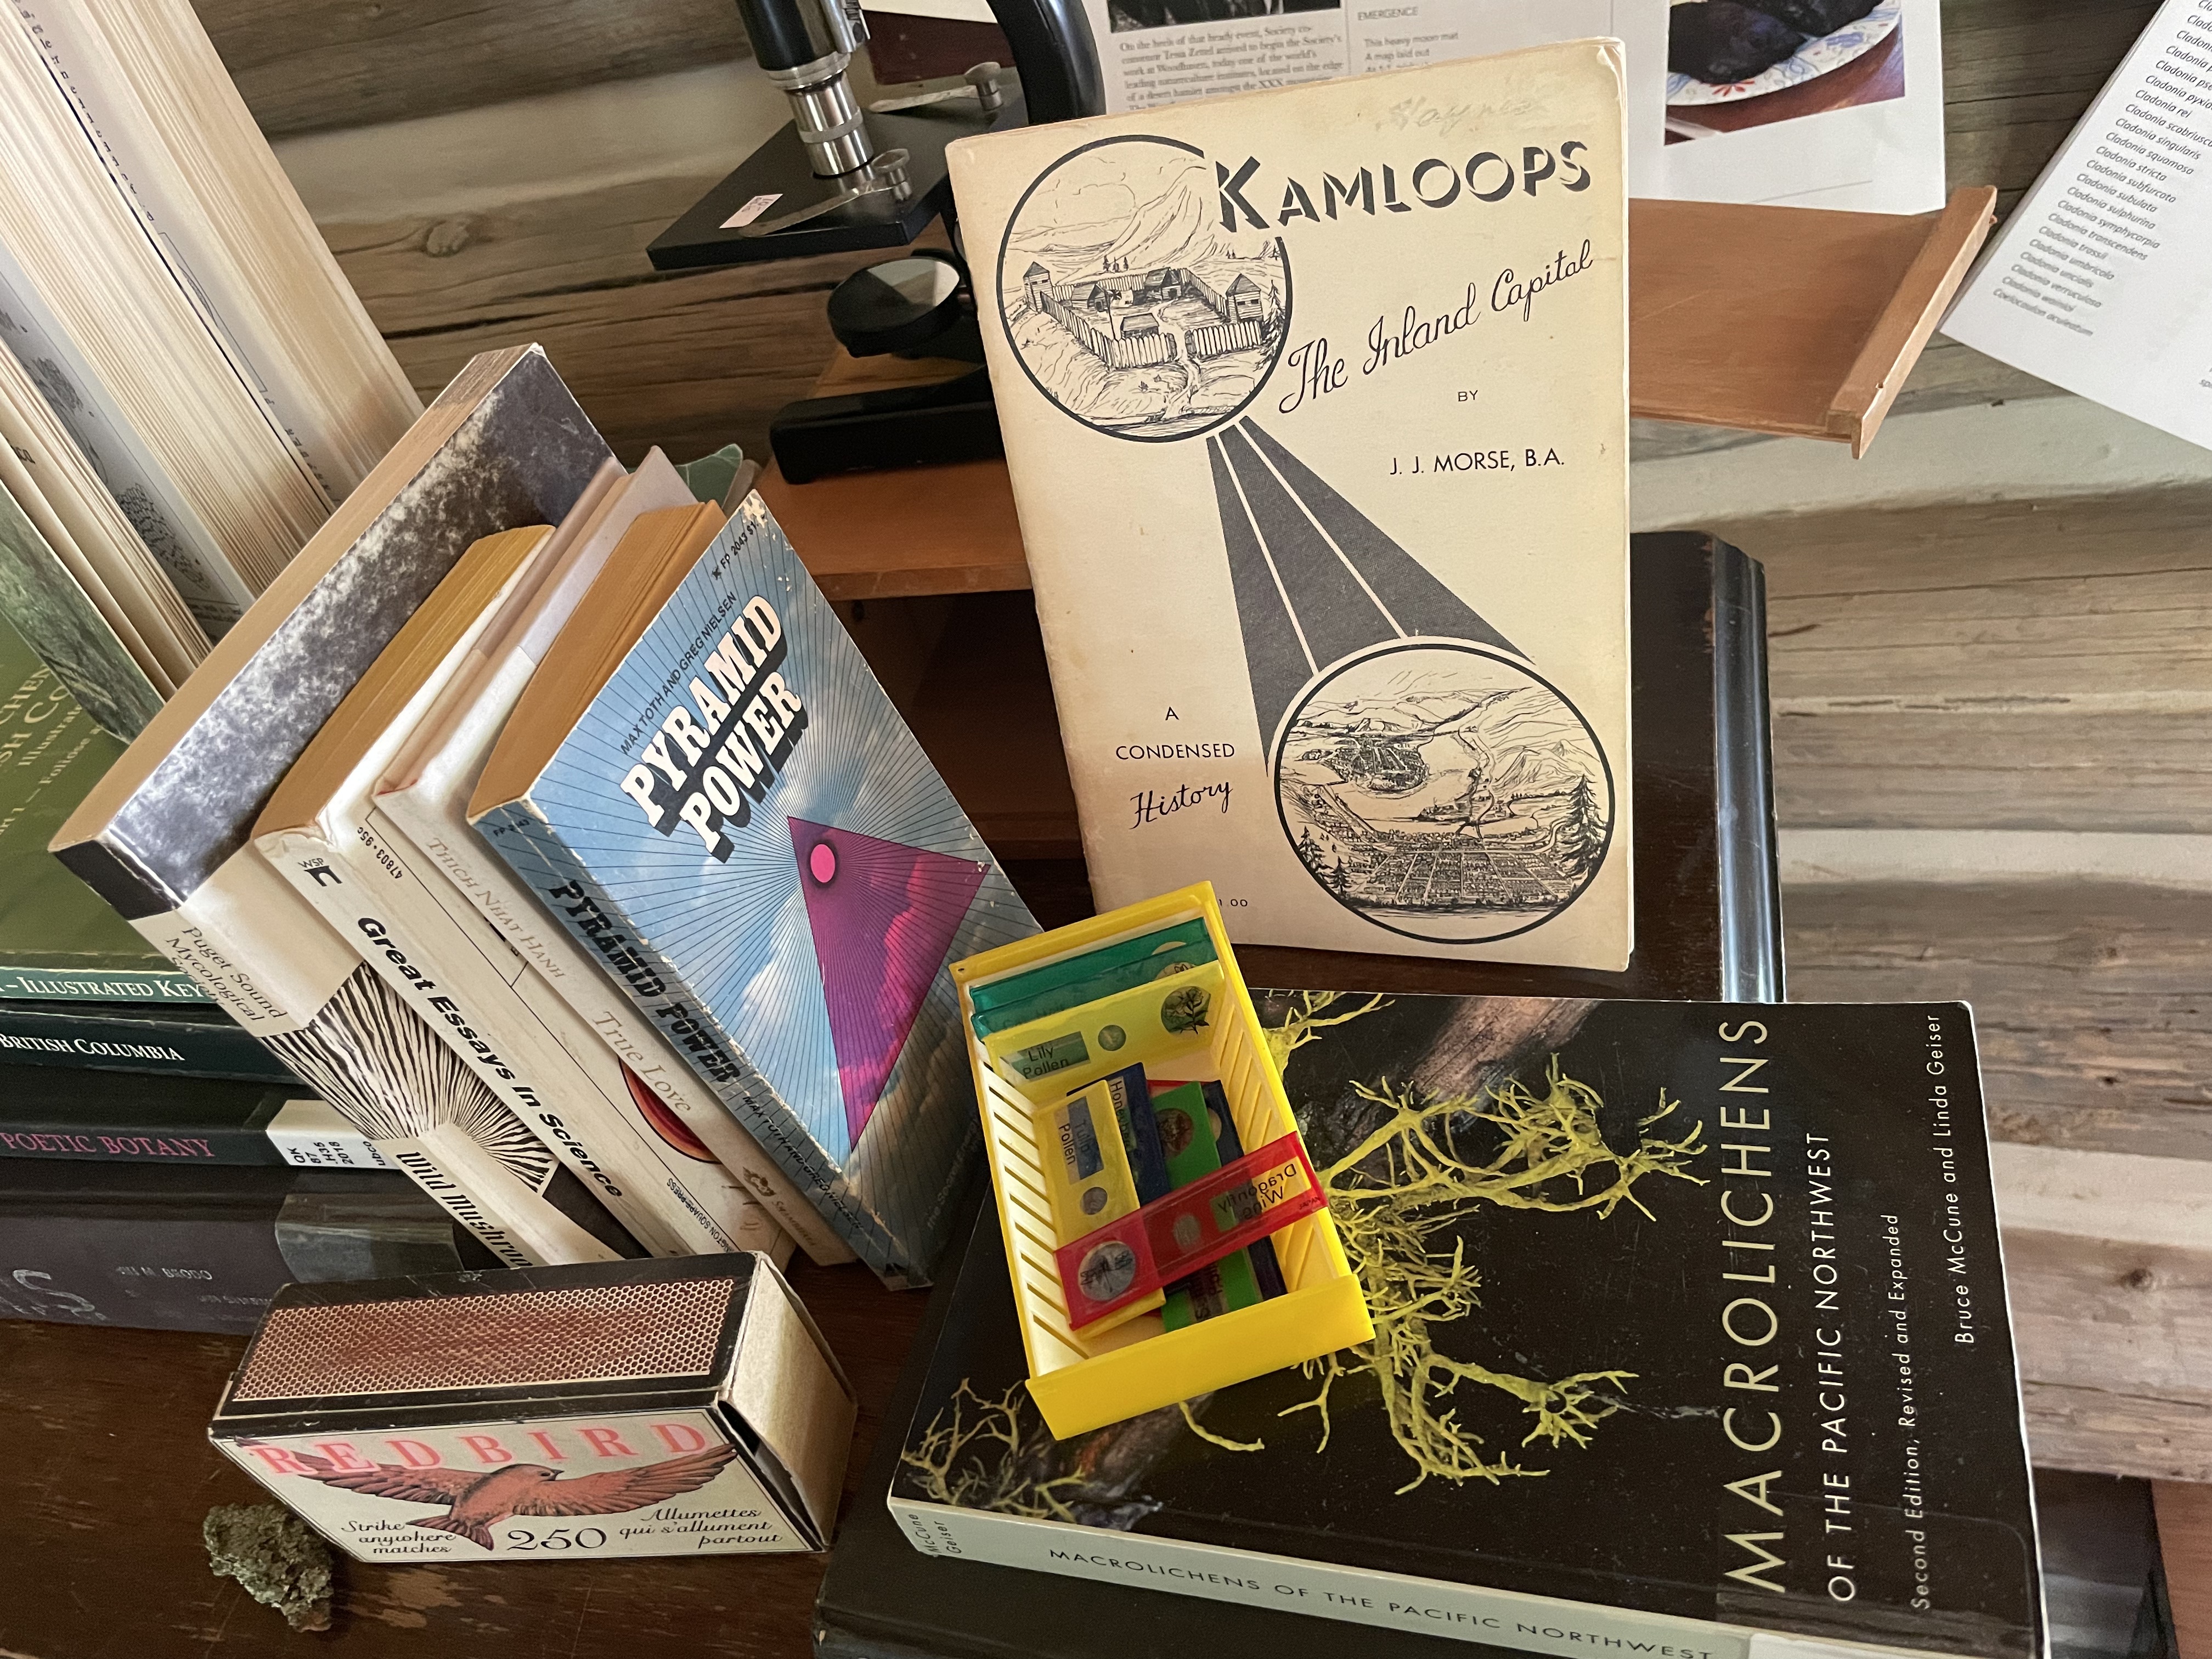 A pile of books, instruments, matches. The main texts have the titles "Macrolichens of the Pacific Northwest" "Pyramid Power" and "Kamloops: The Inland Capital"